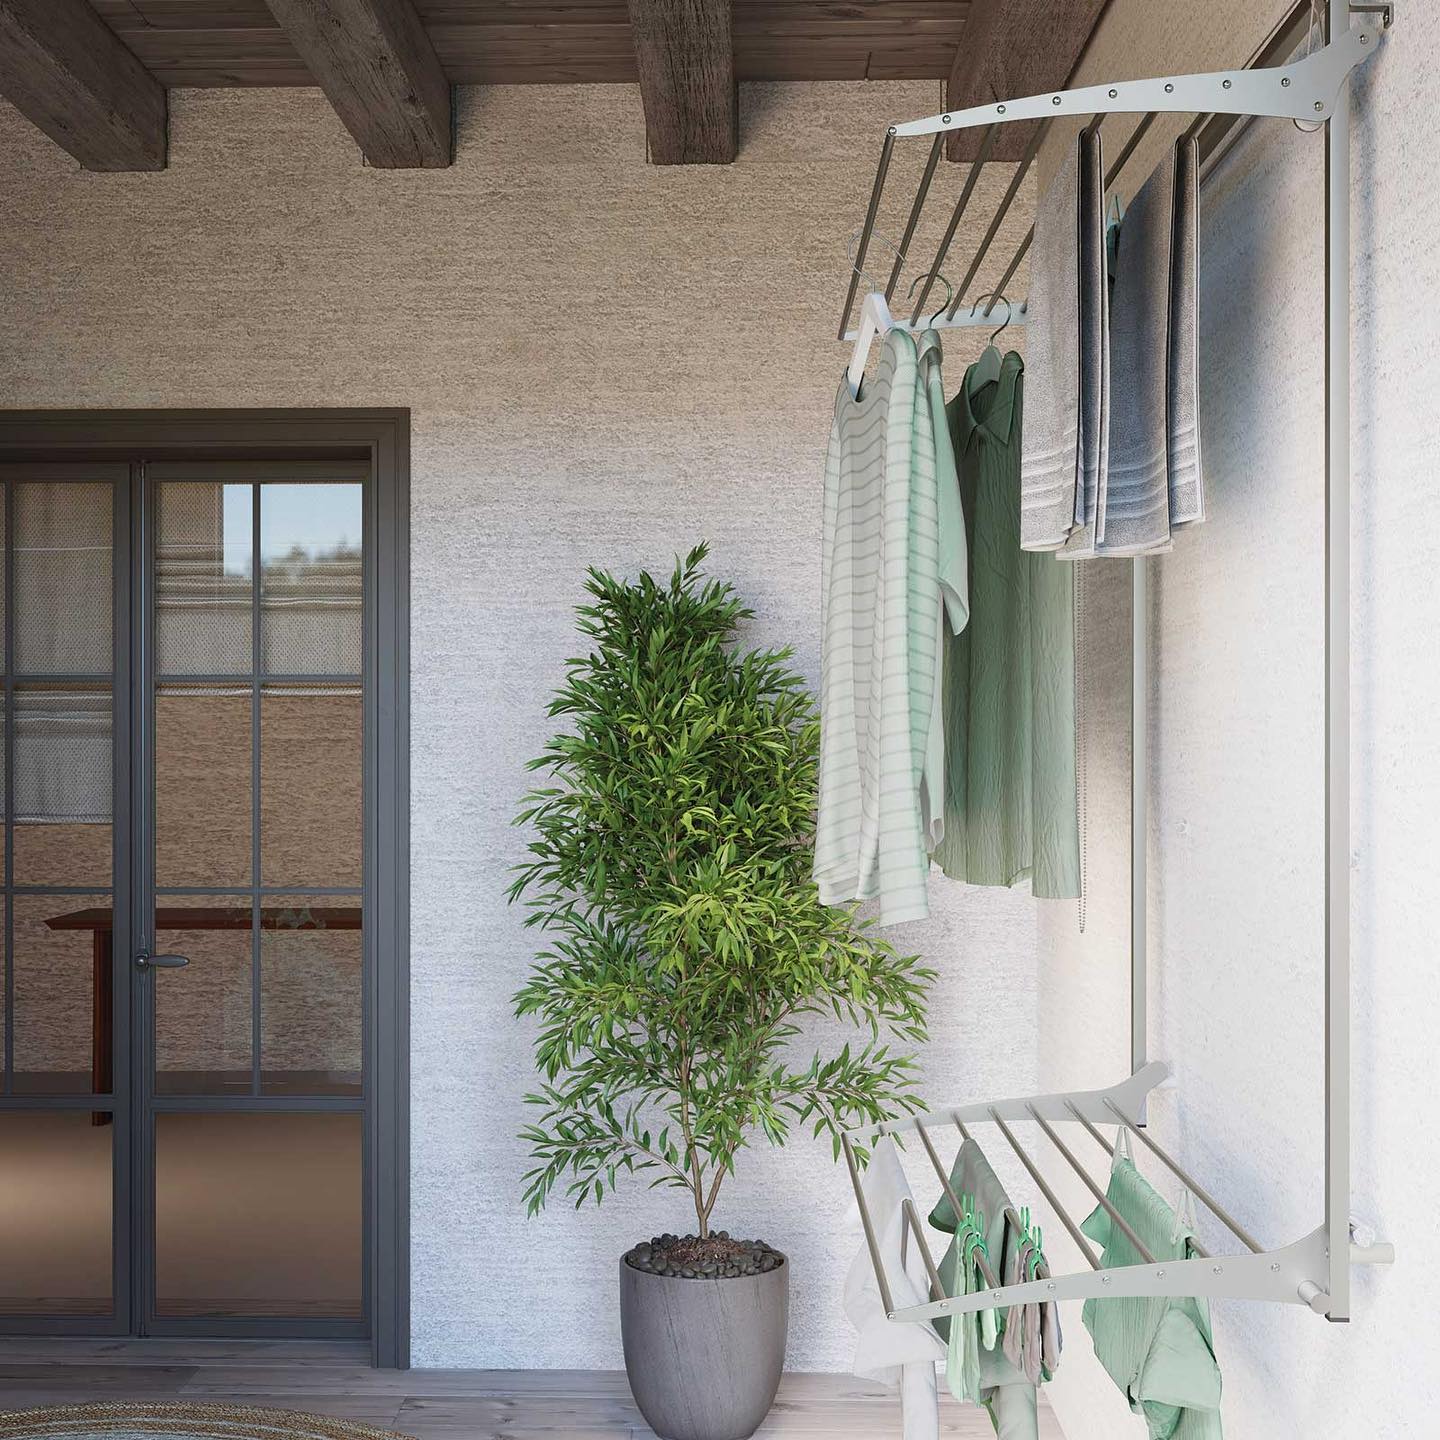 A clothes drying rack on a patio next to a potted plant offers an efficient and clever use of an otherwise under-utilized outdoor wall space.